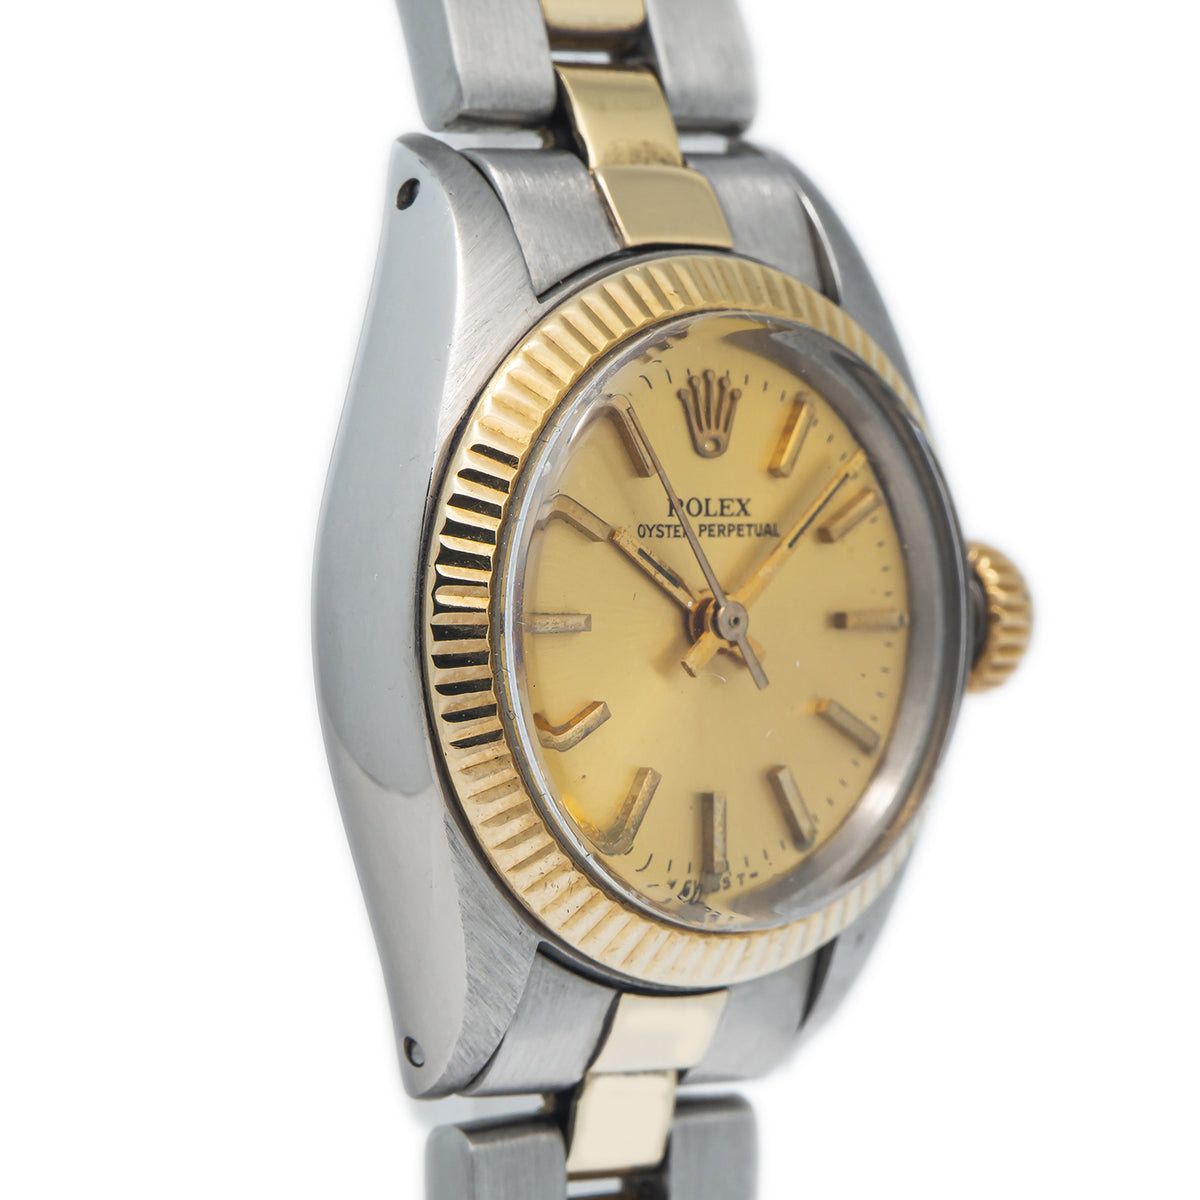 Rolex Oyster Perpetual 6719 18k Yellow Gold Two Tone Champagne Dial Watch 26mm